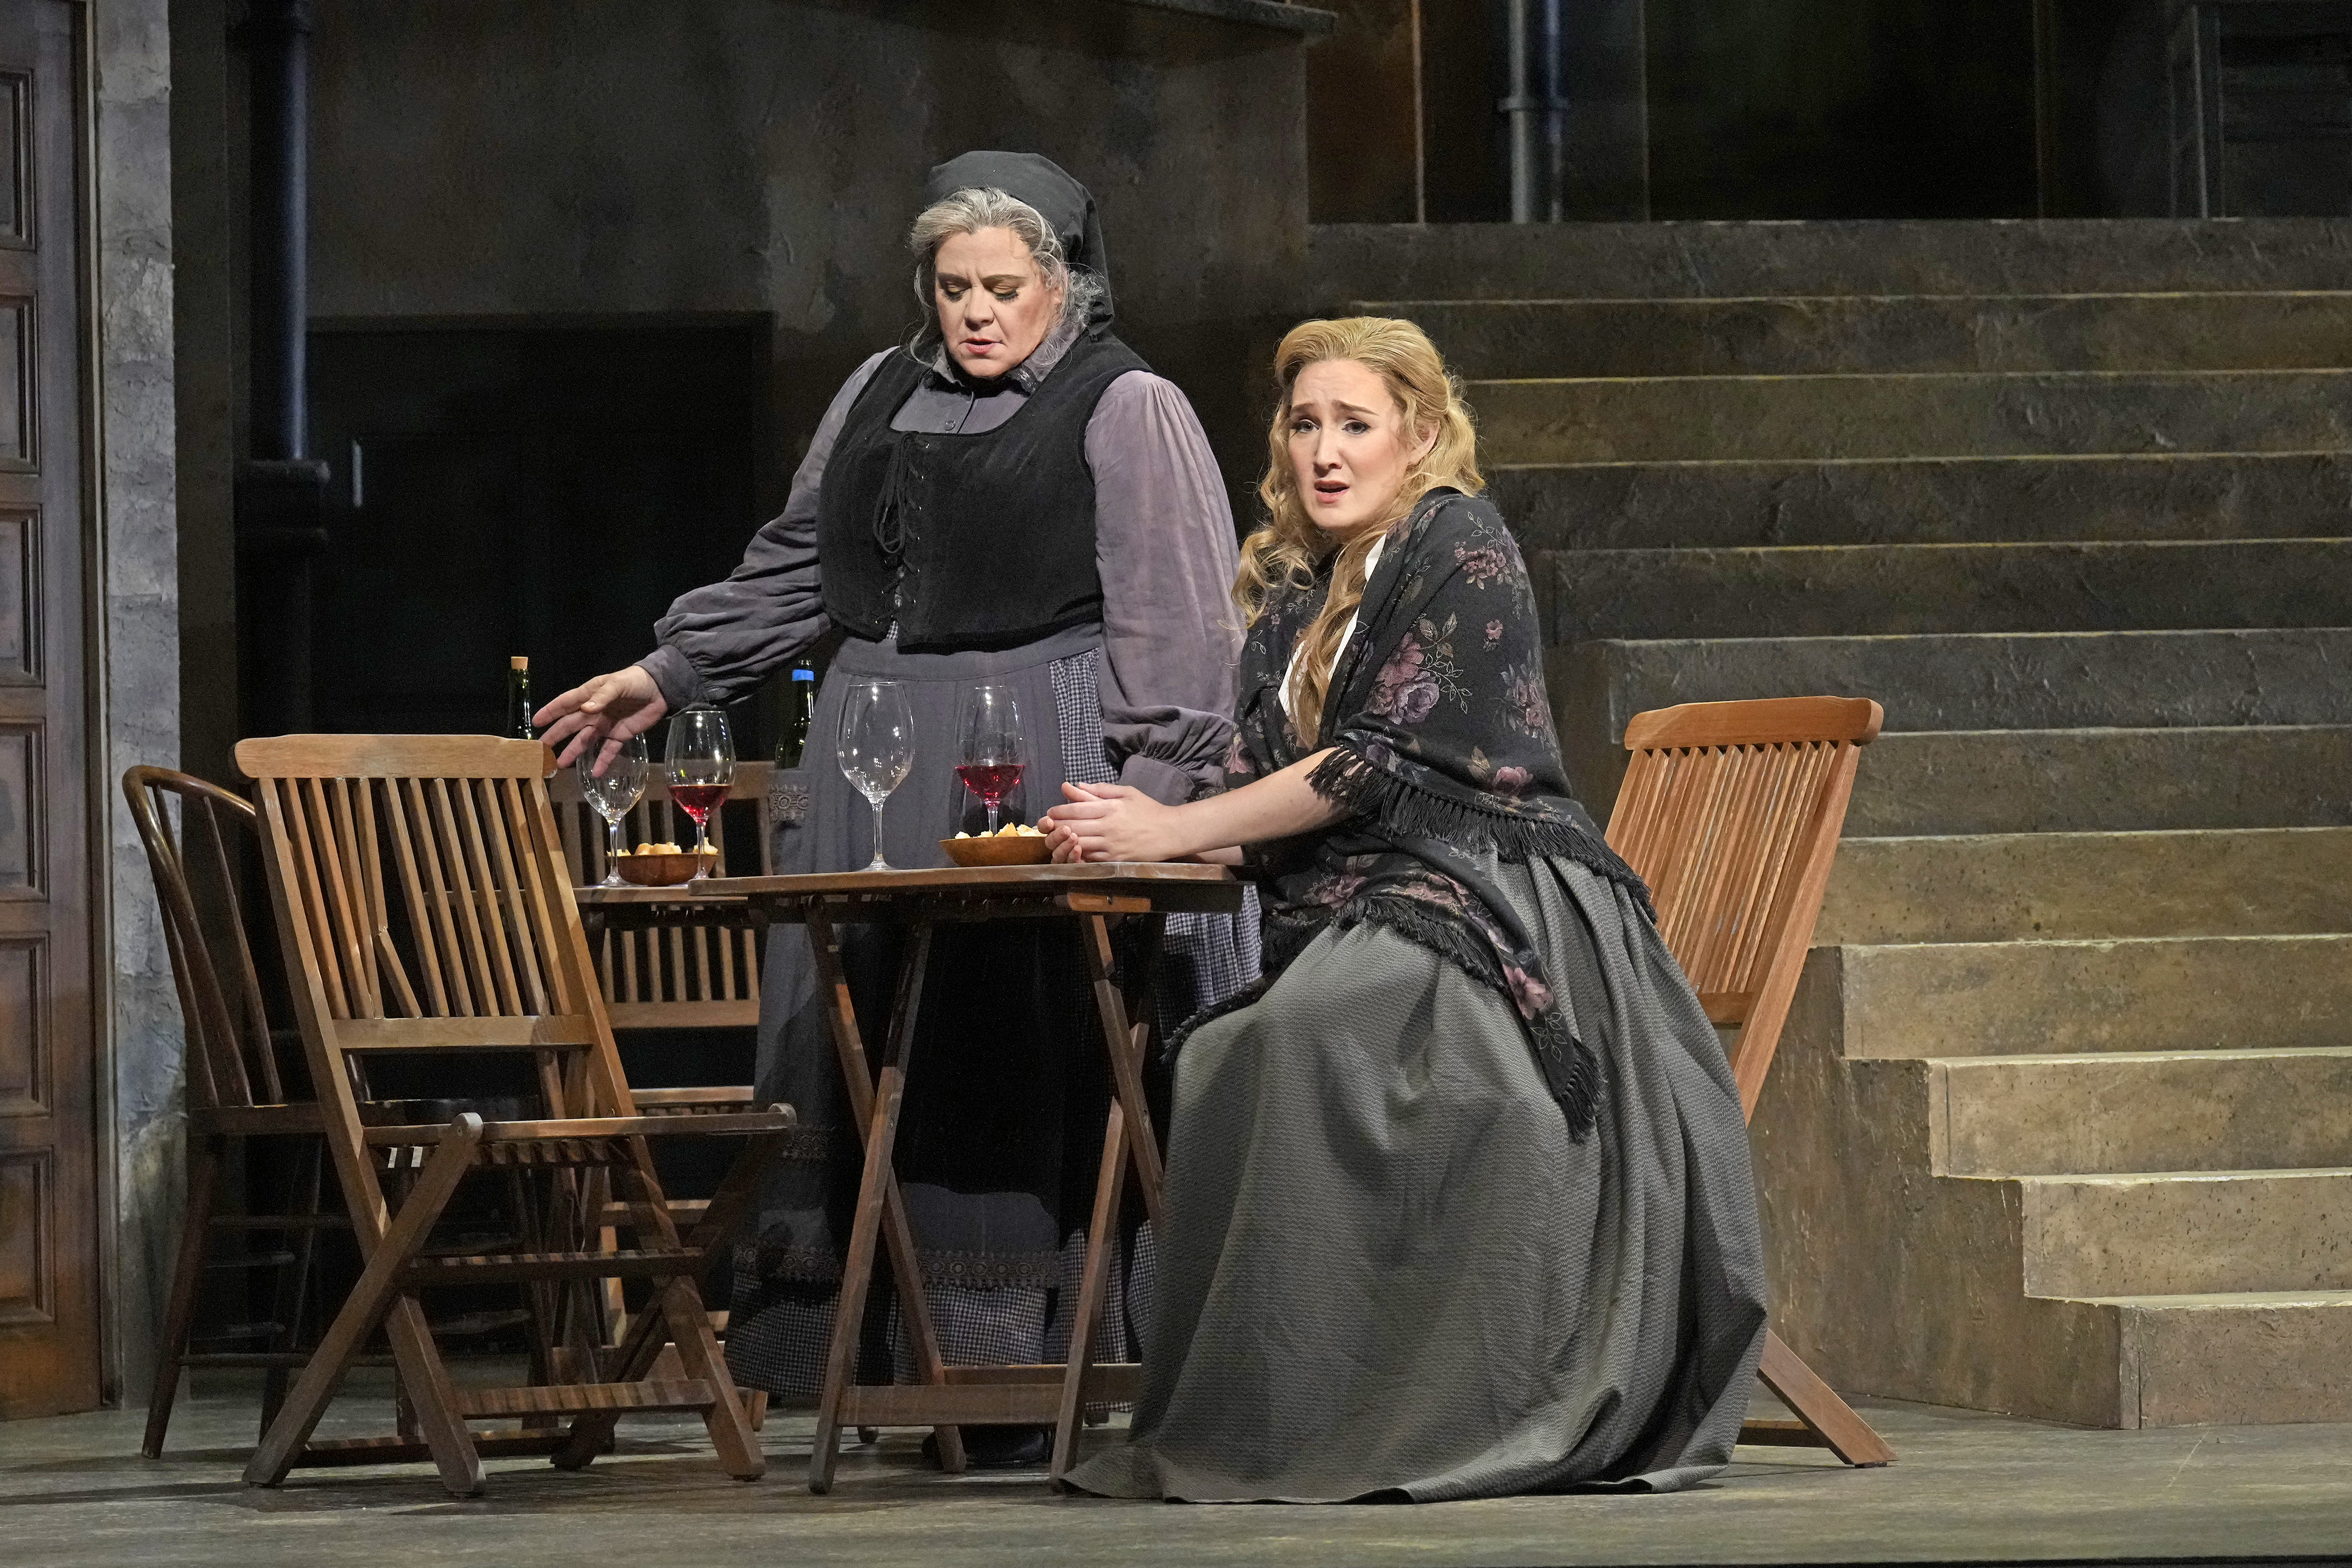 REVIEW: Opera’s ultimate double-bill gets classy send-up